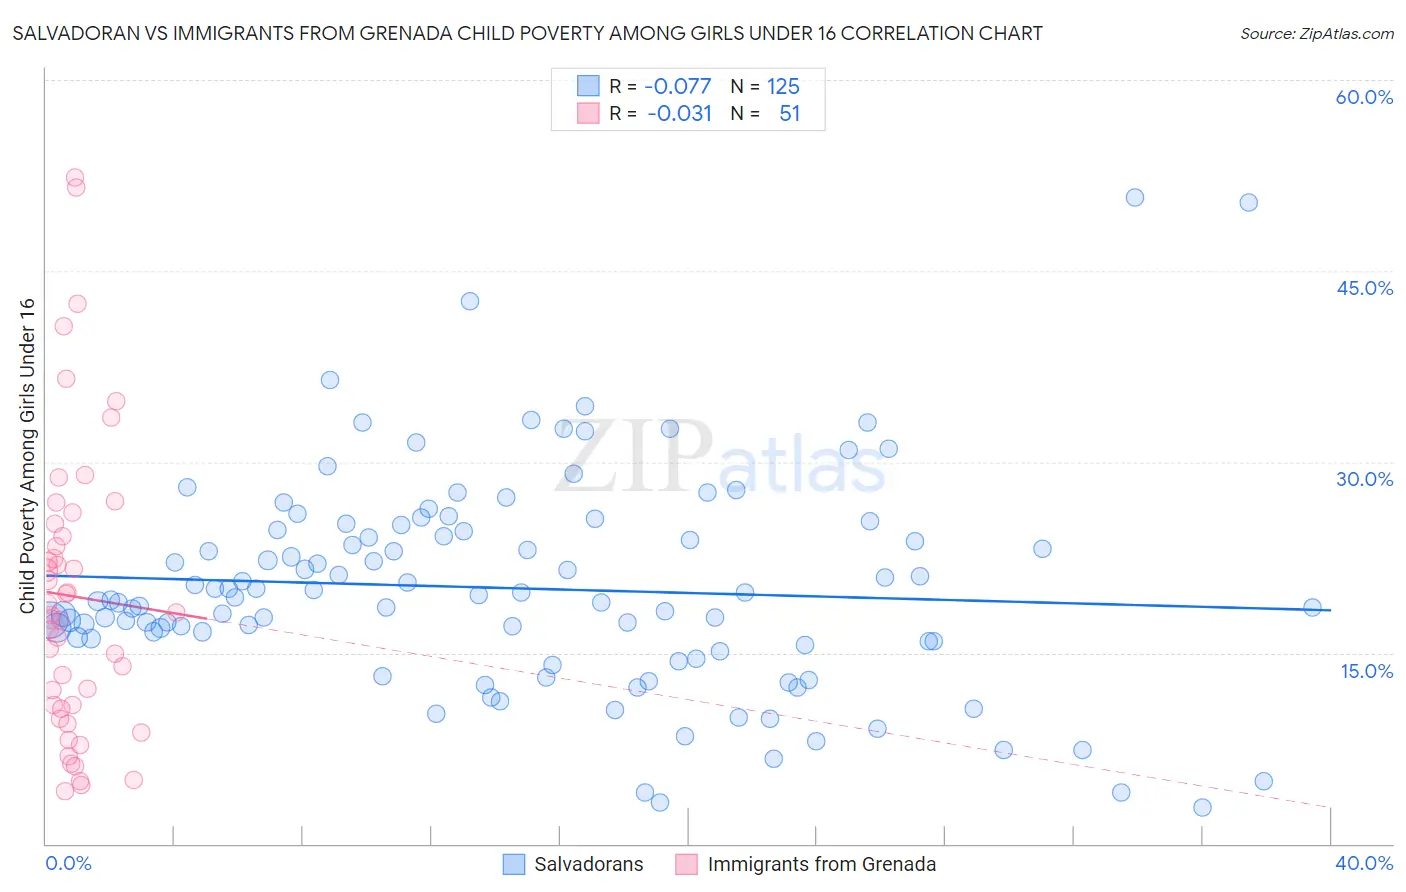 Salvadoran vs Immigrants from Grenada Child Poverty Among Girls Under 16